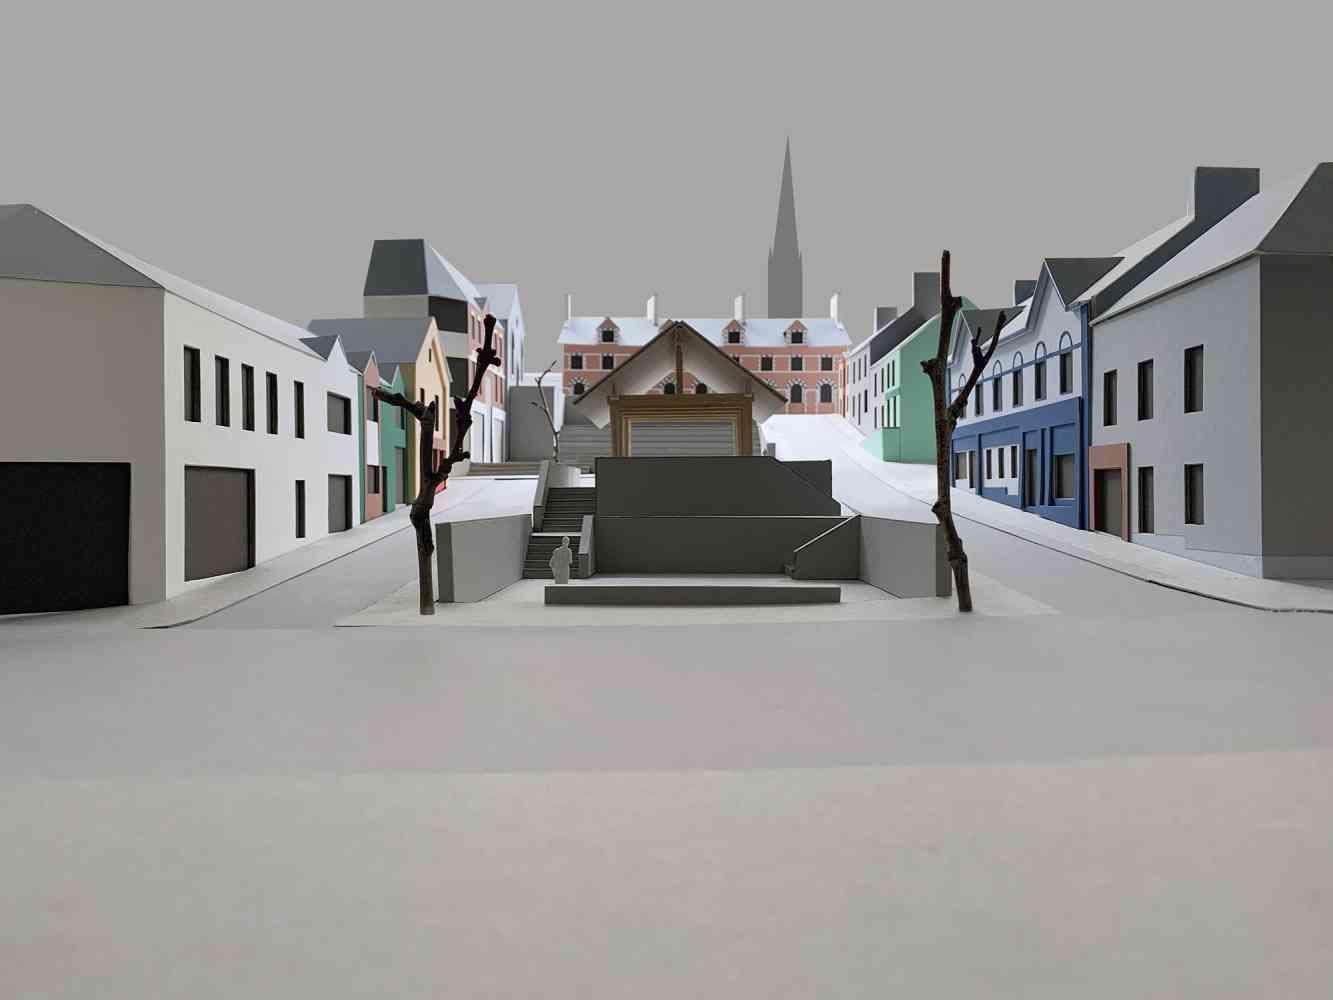 Letterkenny Market Square - Competition design for a new public building in Co. Donegal, Ireland